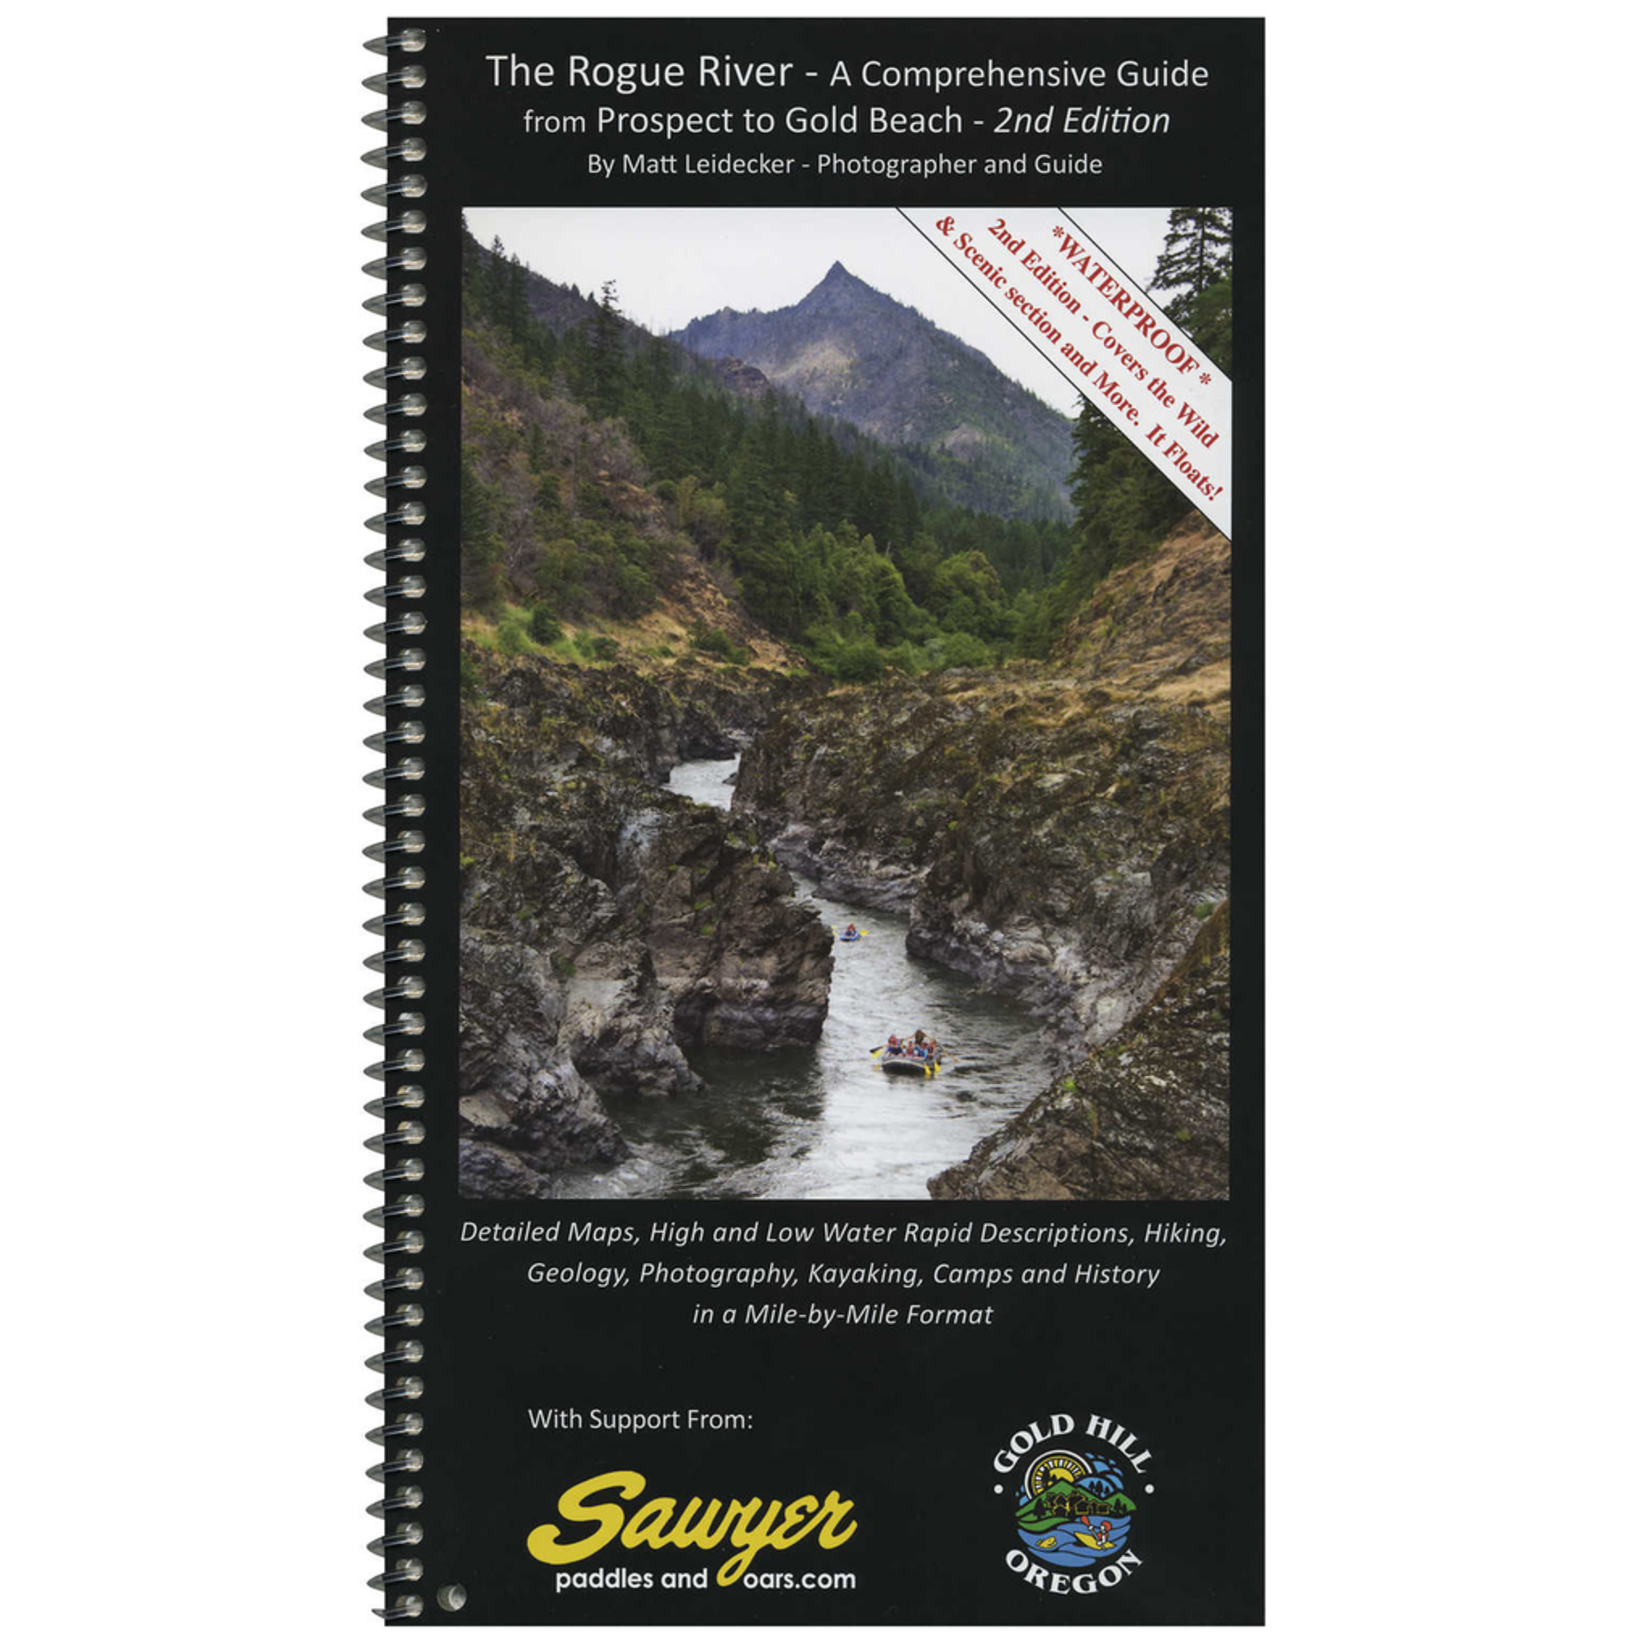 The Rogue River - Comprehensive Guide 3rd Edition